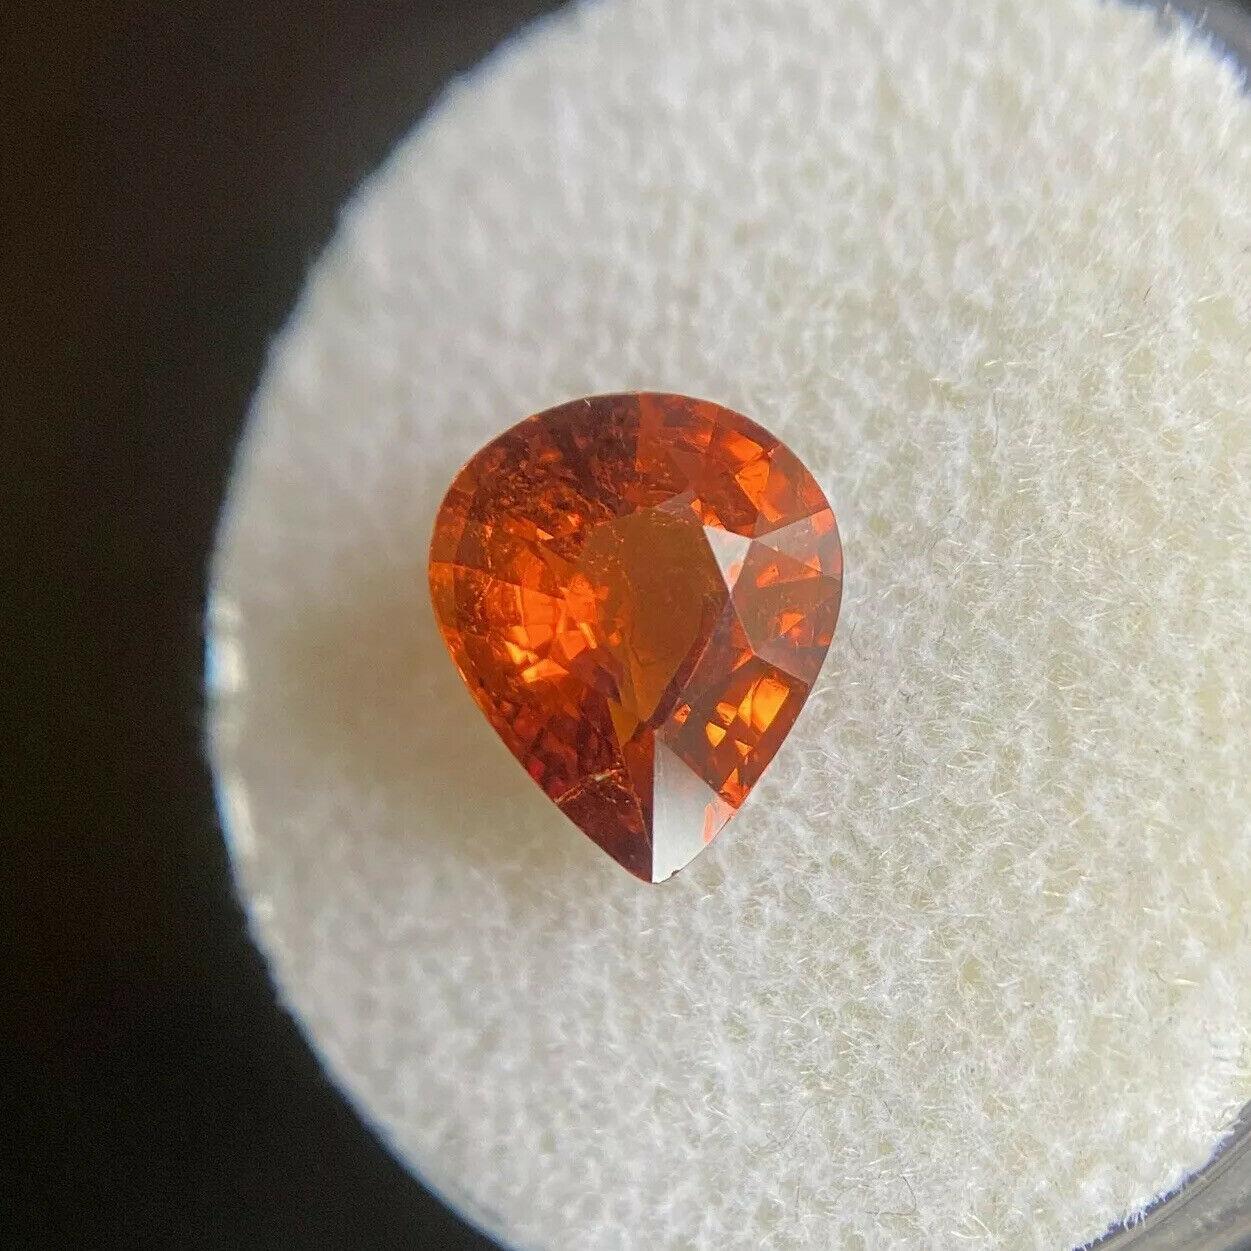 Fine Vivid Orange Red Spessartine Garnet 2.31ct Pear Cut Loose Gem 9.4 x 8mm

Natural Spessartine Garnet Loose Gemstone. 
2.31 carat stone with a beautiful reddish orange colour and good clarity. Some small natural inclusions visible when looking